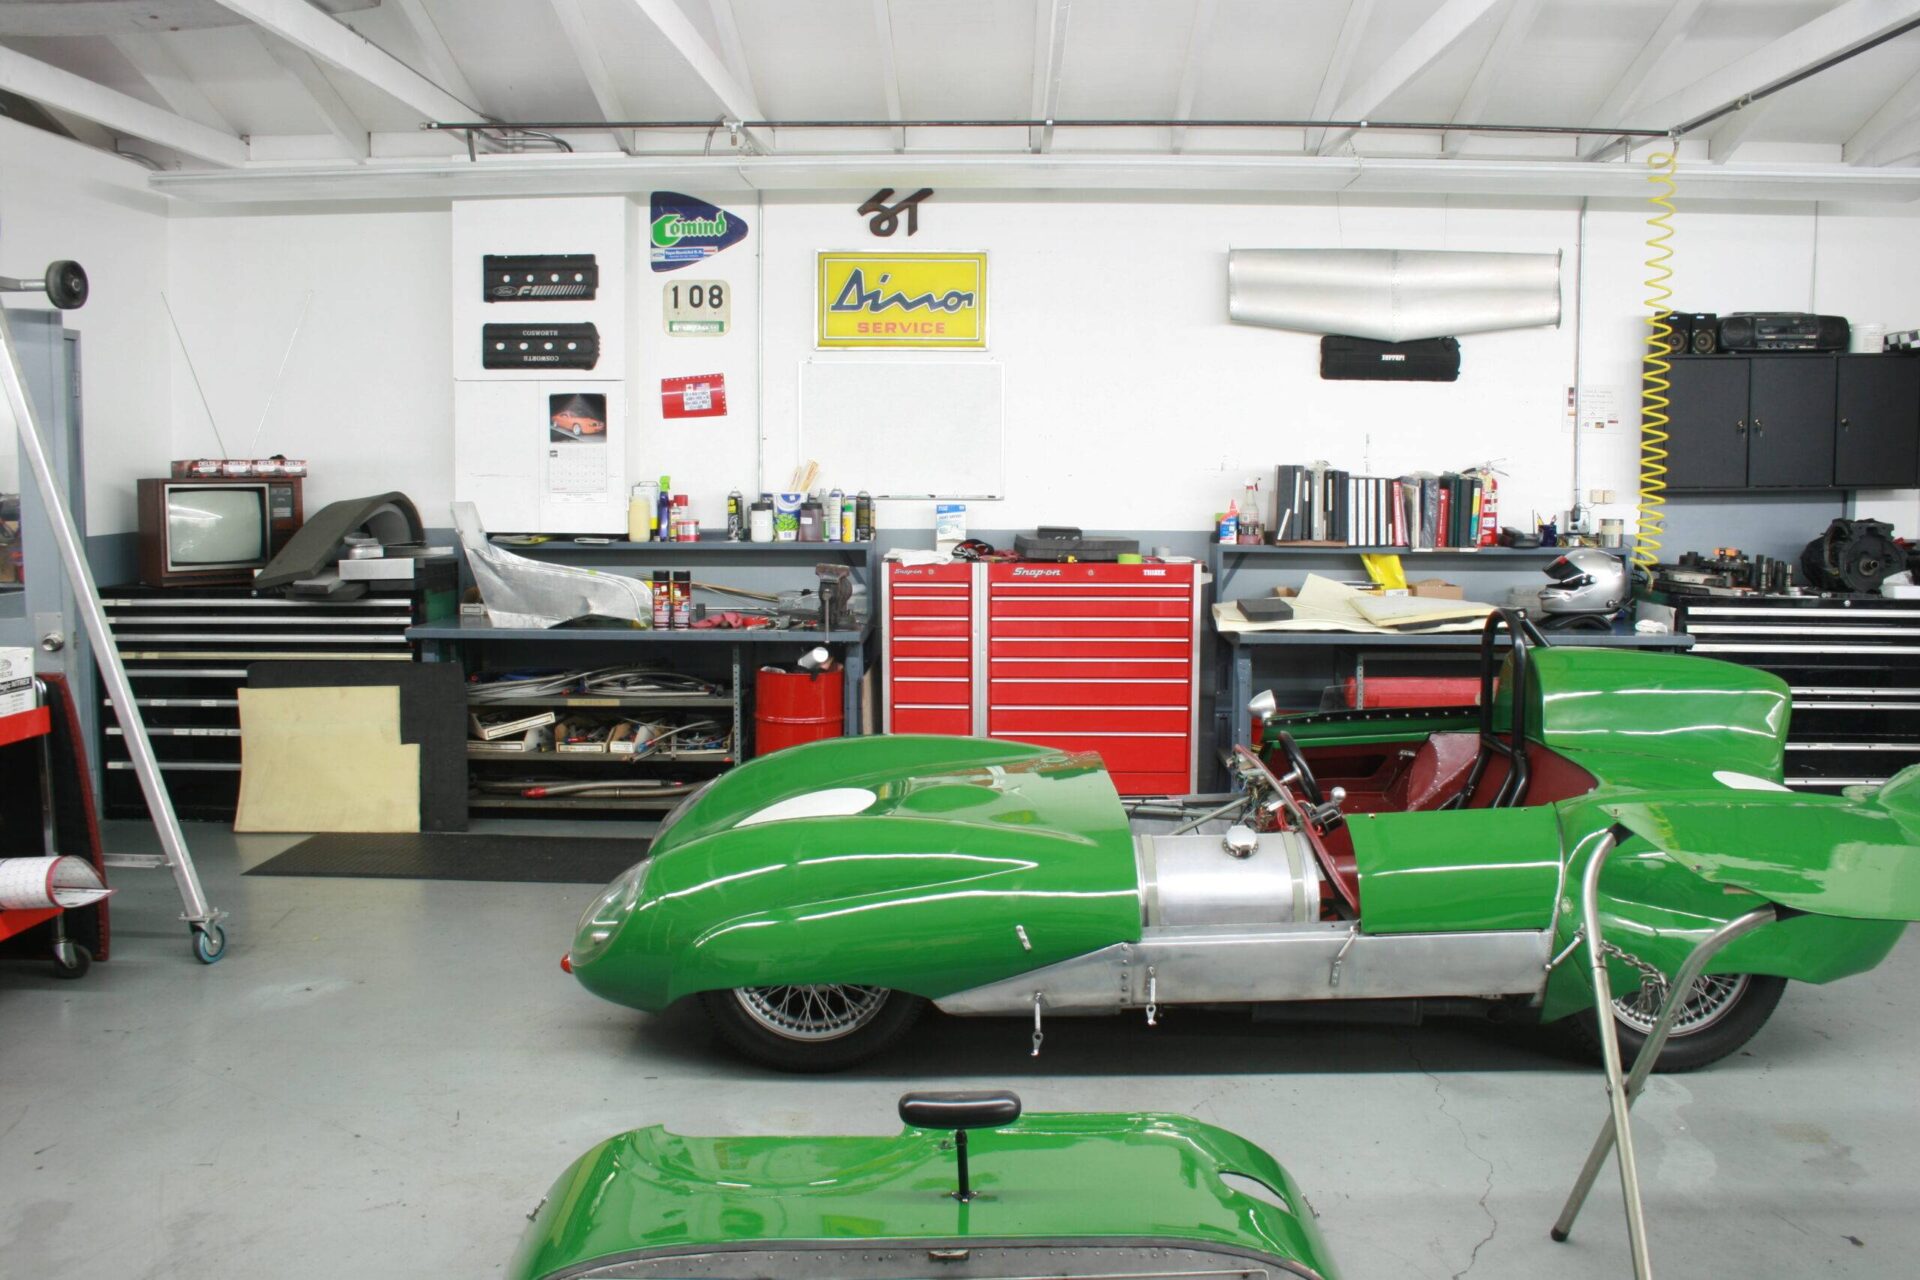 A Look at Fast Cars (formerly Tillack & Co)